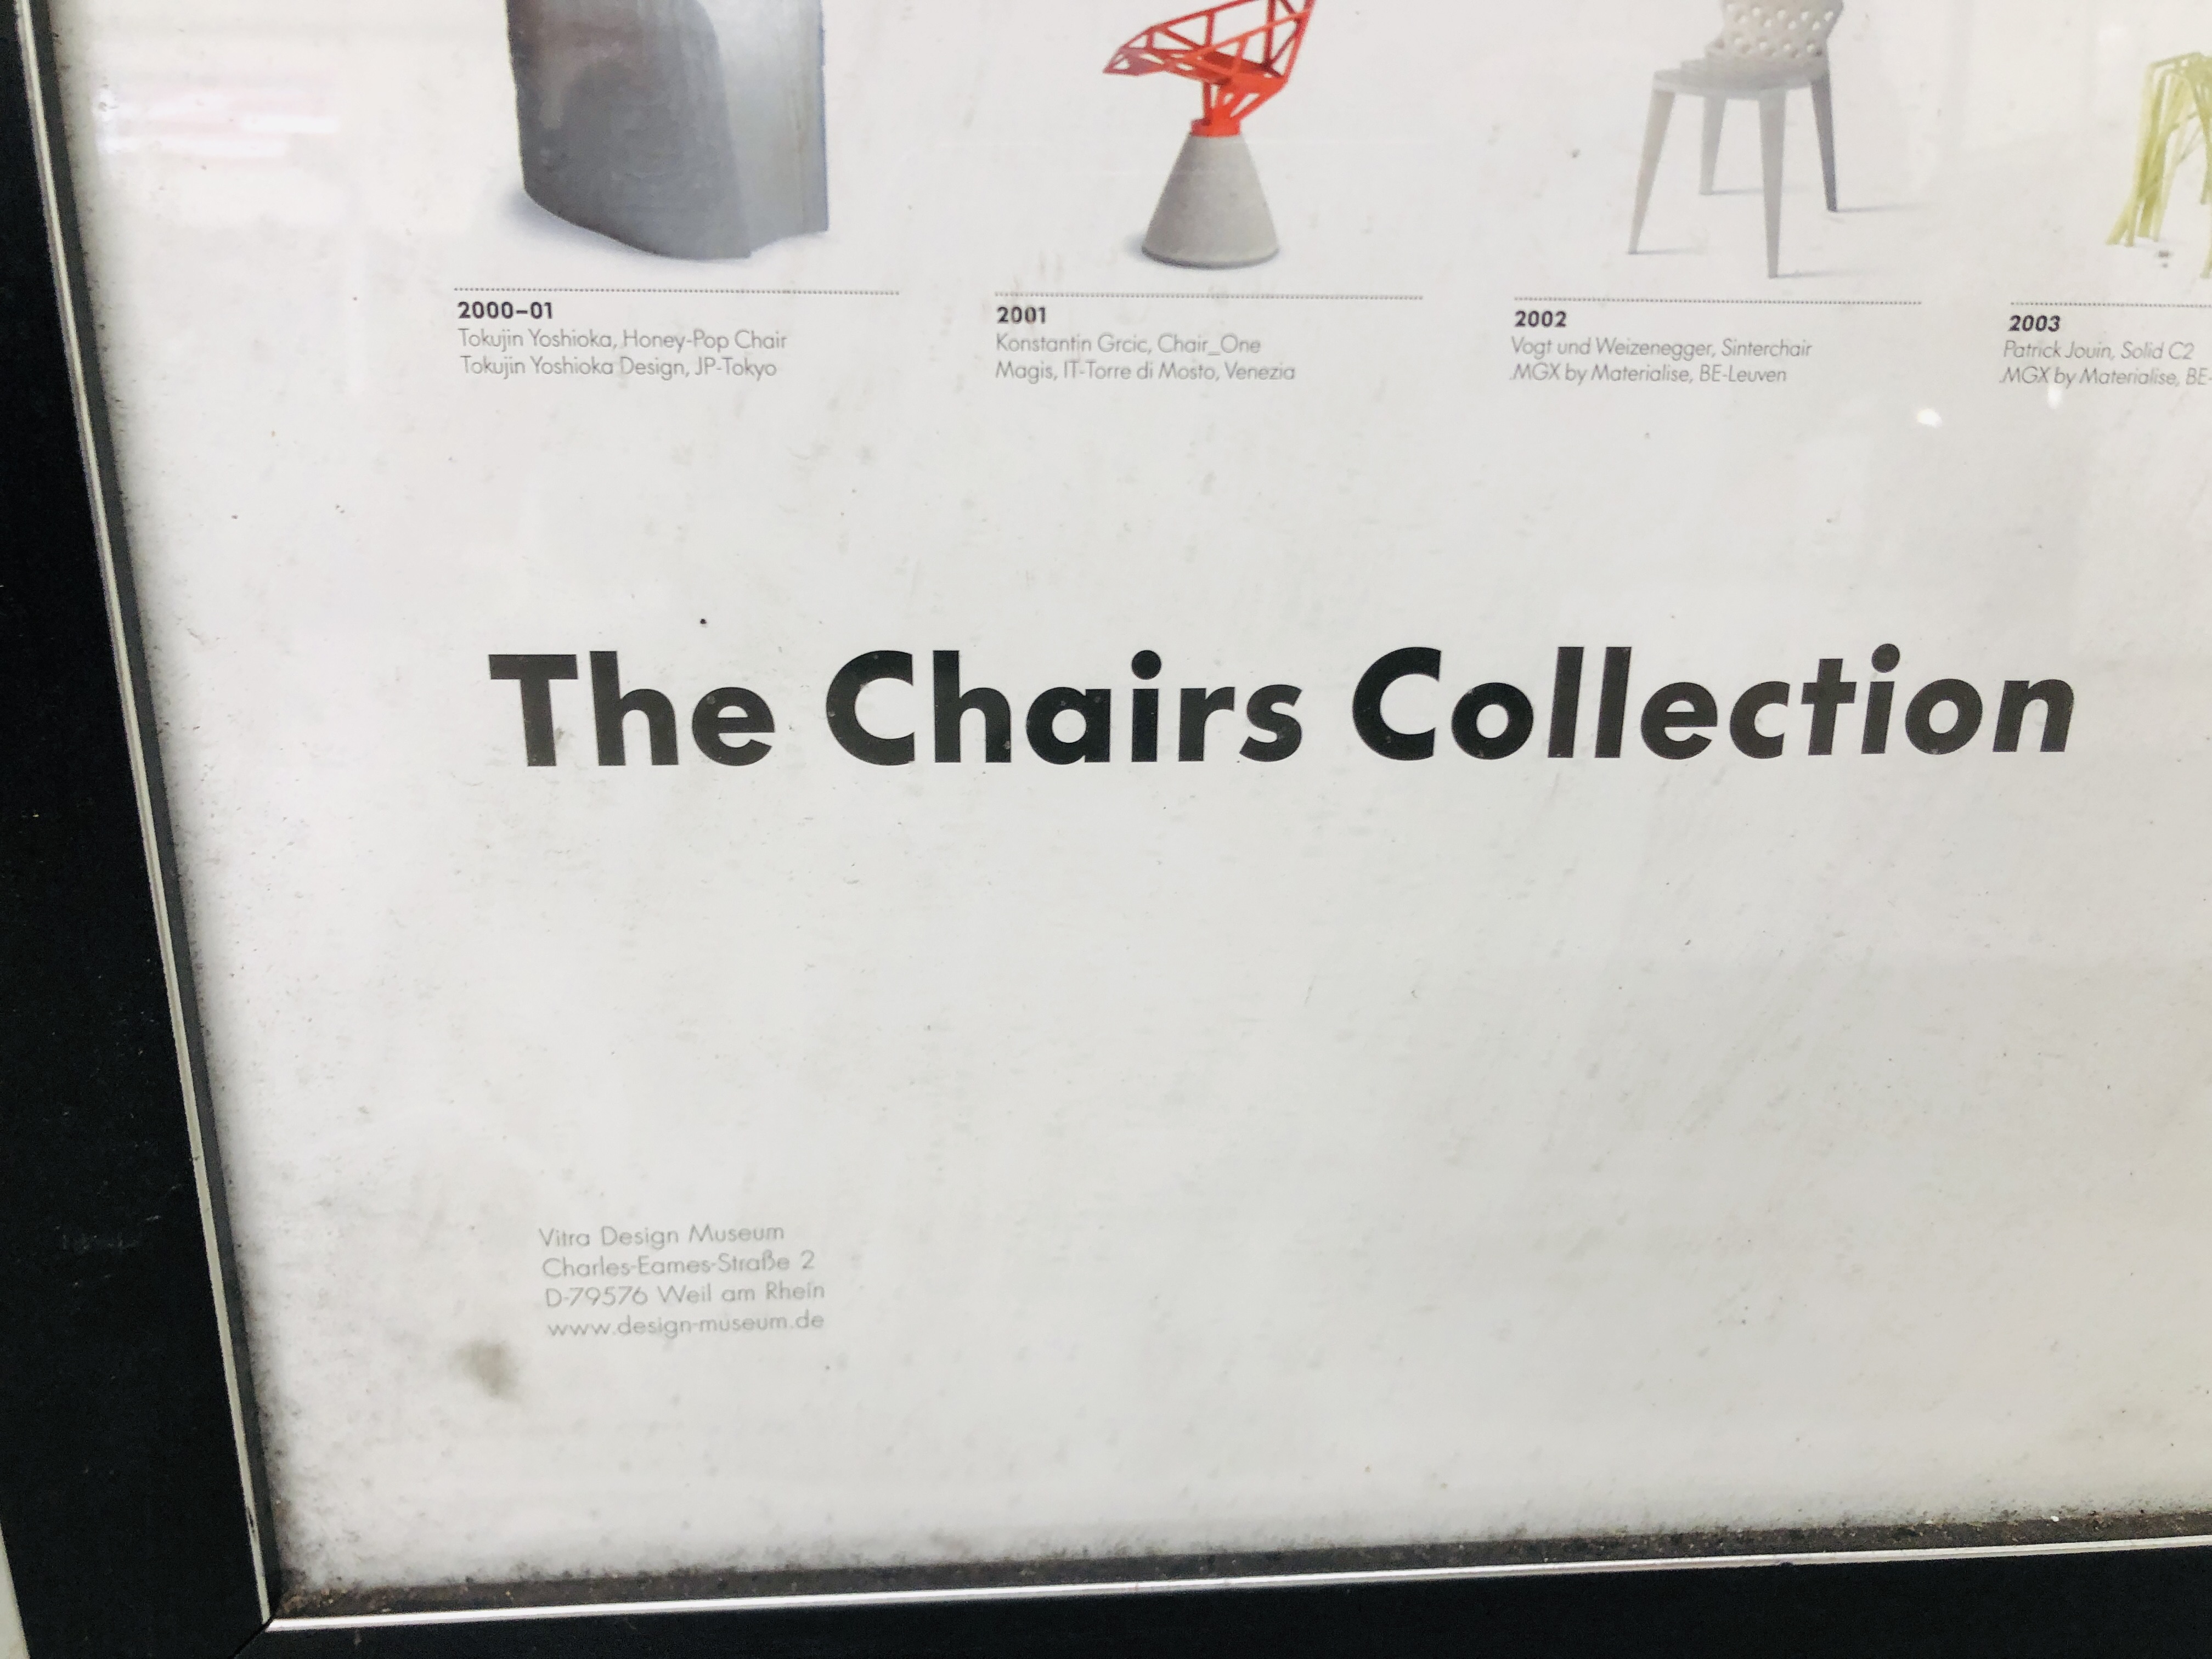 A LARGE VITRA DESIGN MUSEUM "THE CHAIRS COLLECTION" POSTER 1803 TO 2012. - Image 2 of 9